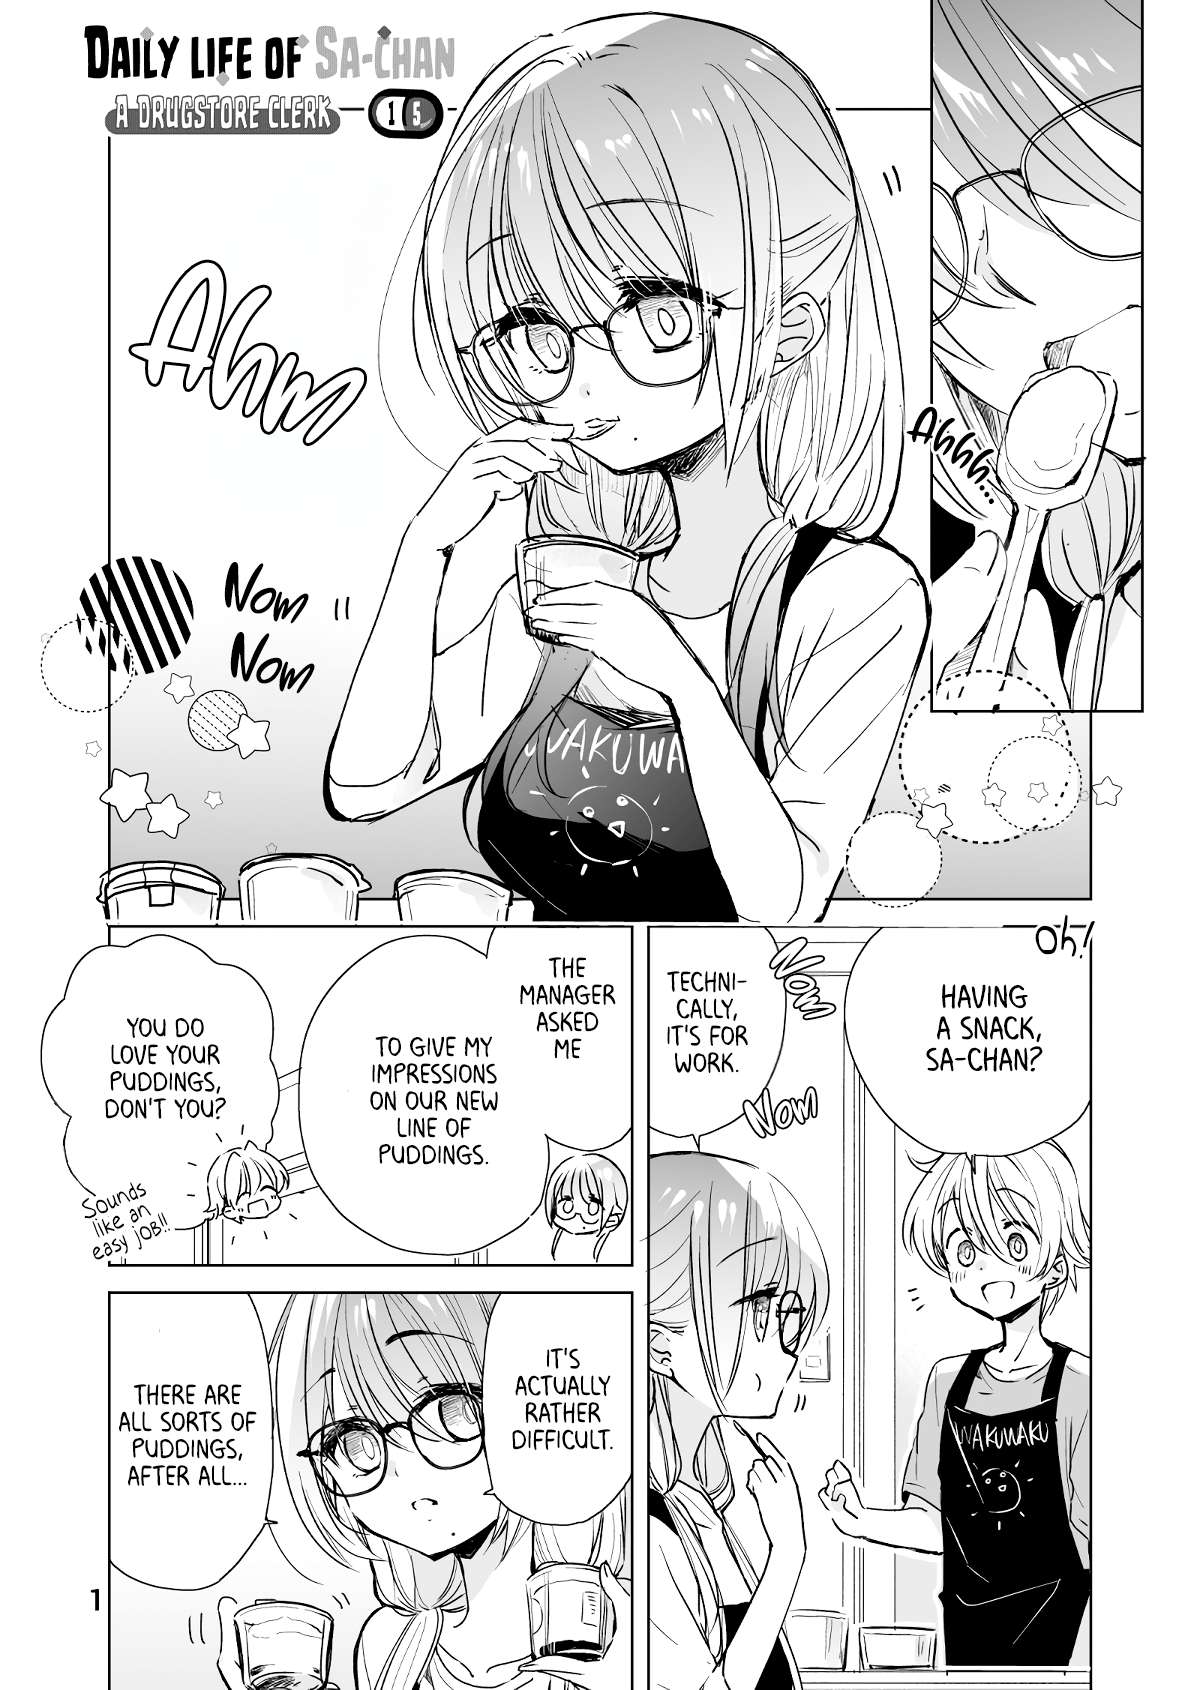 Daily Life Of Sa-Chan, A Drugstore Clerk - chapter 15 - #1